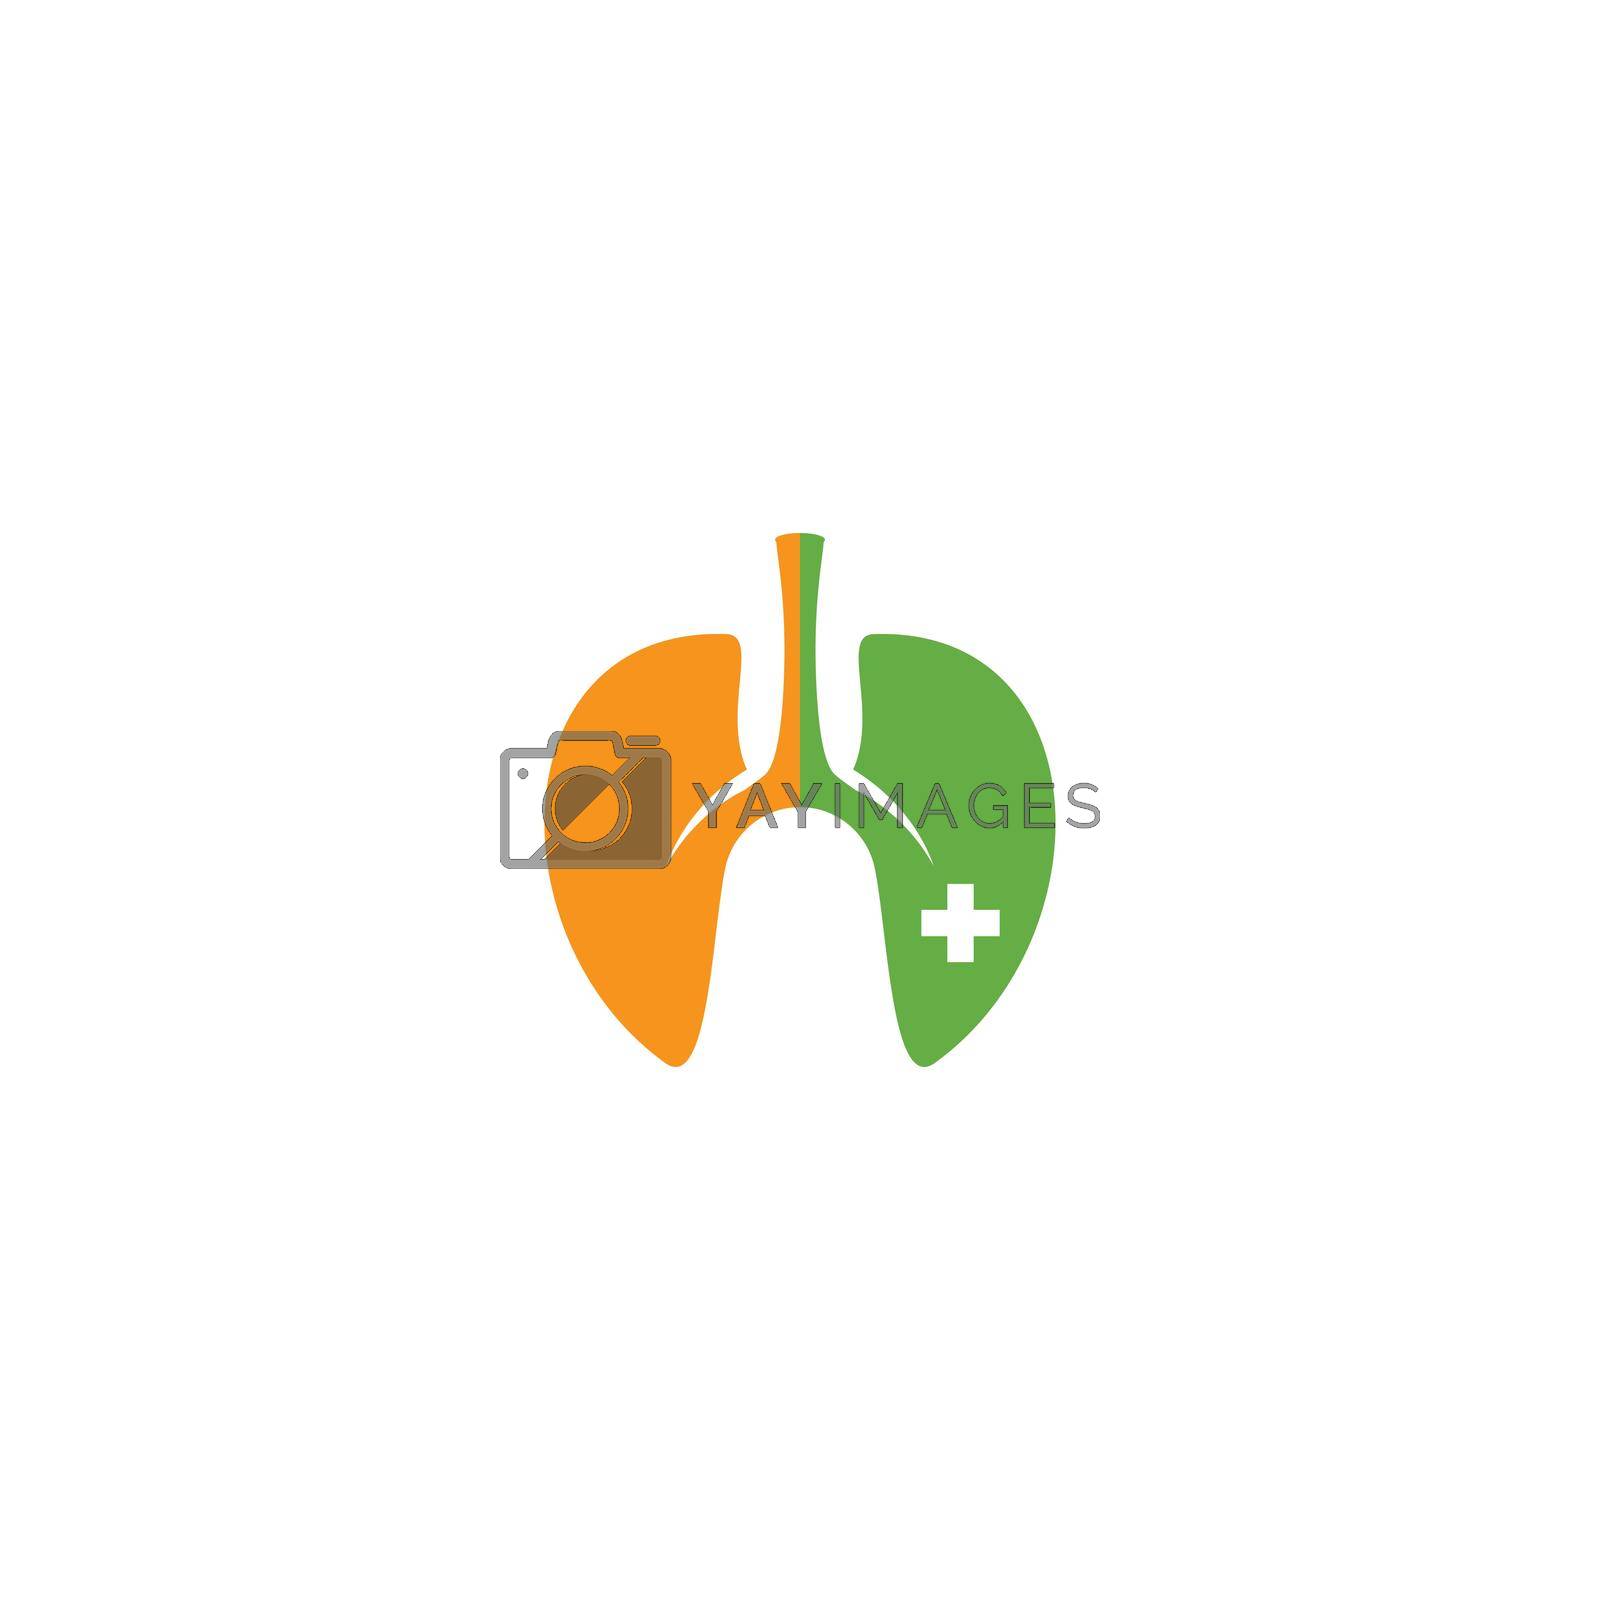 Royalty free image of Lungs illustration vector by awk